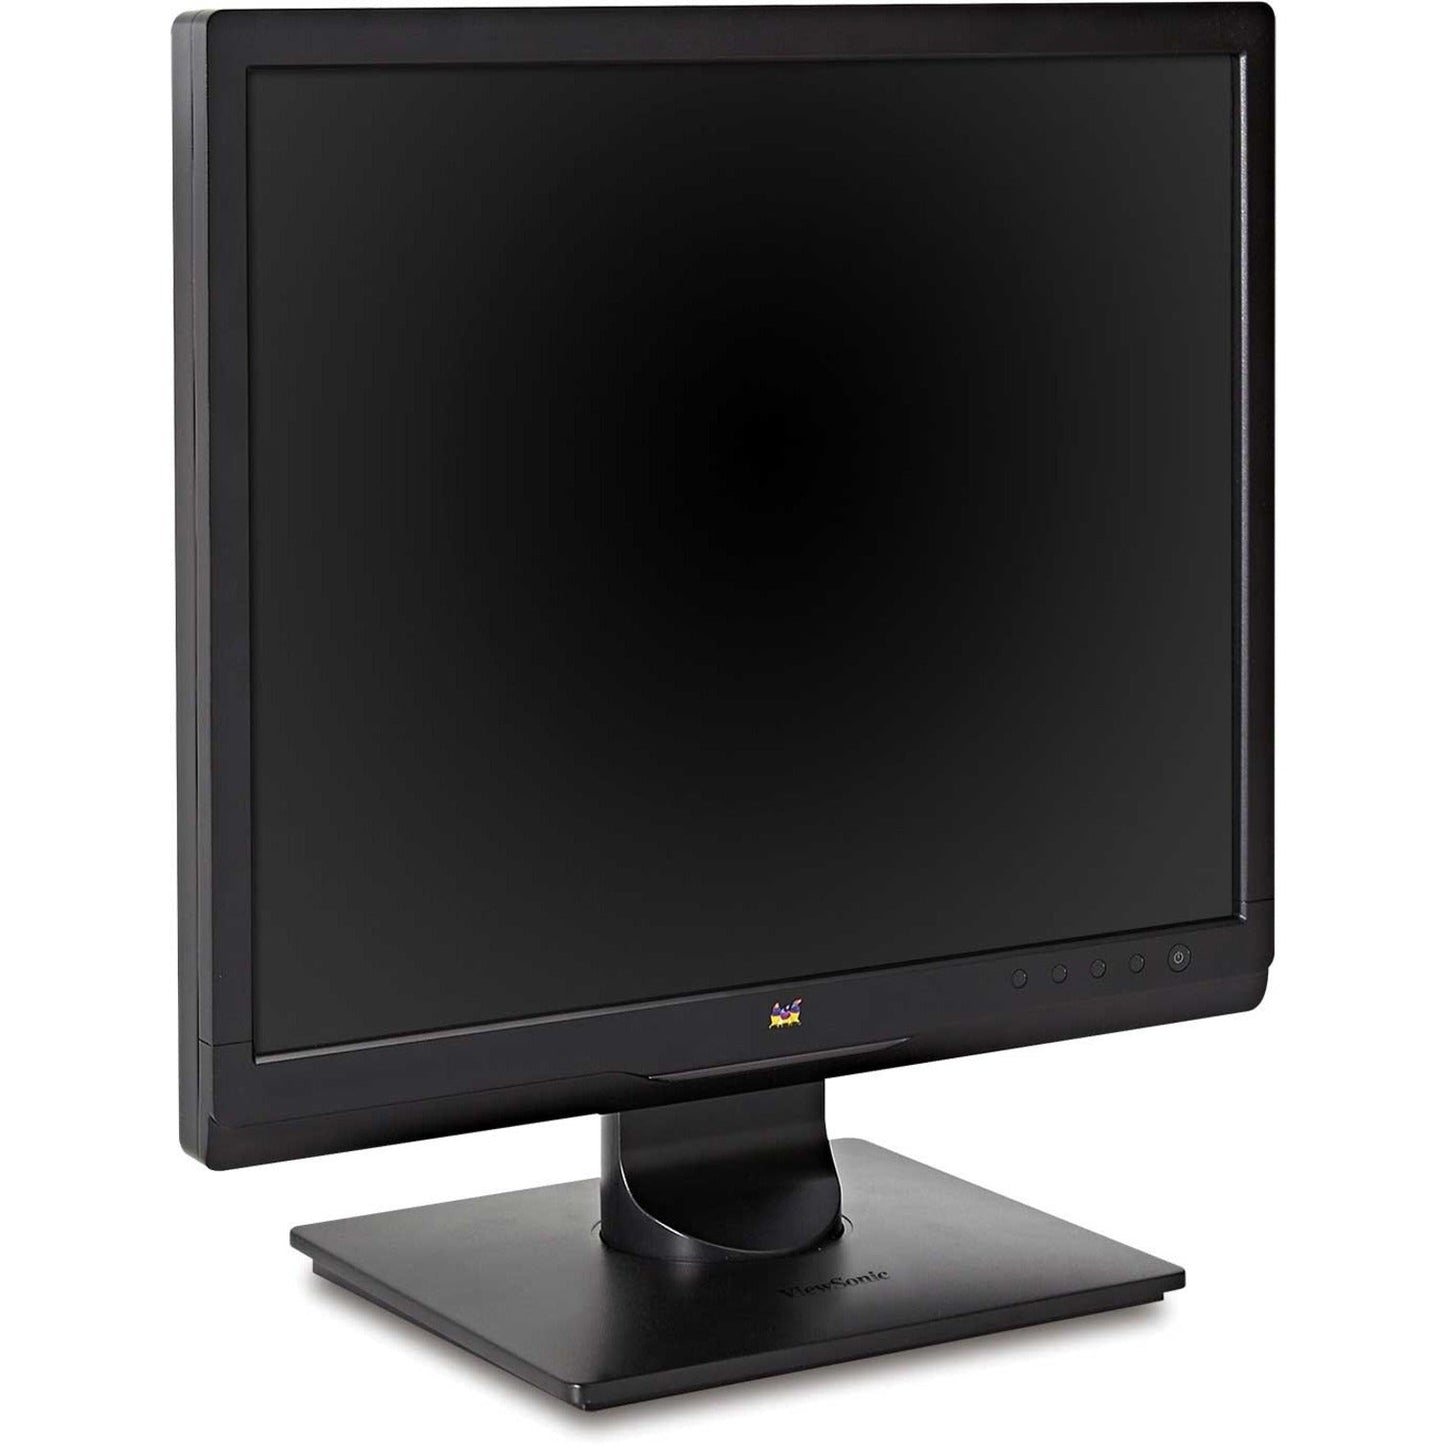 ViewSonic VA708A 17 Inch 1024p LED Monitor with 100% sRGB Color Correction and 5:4 Aspect Ratio